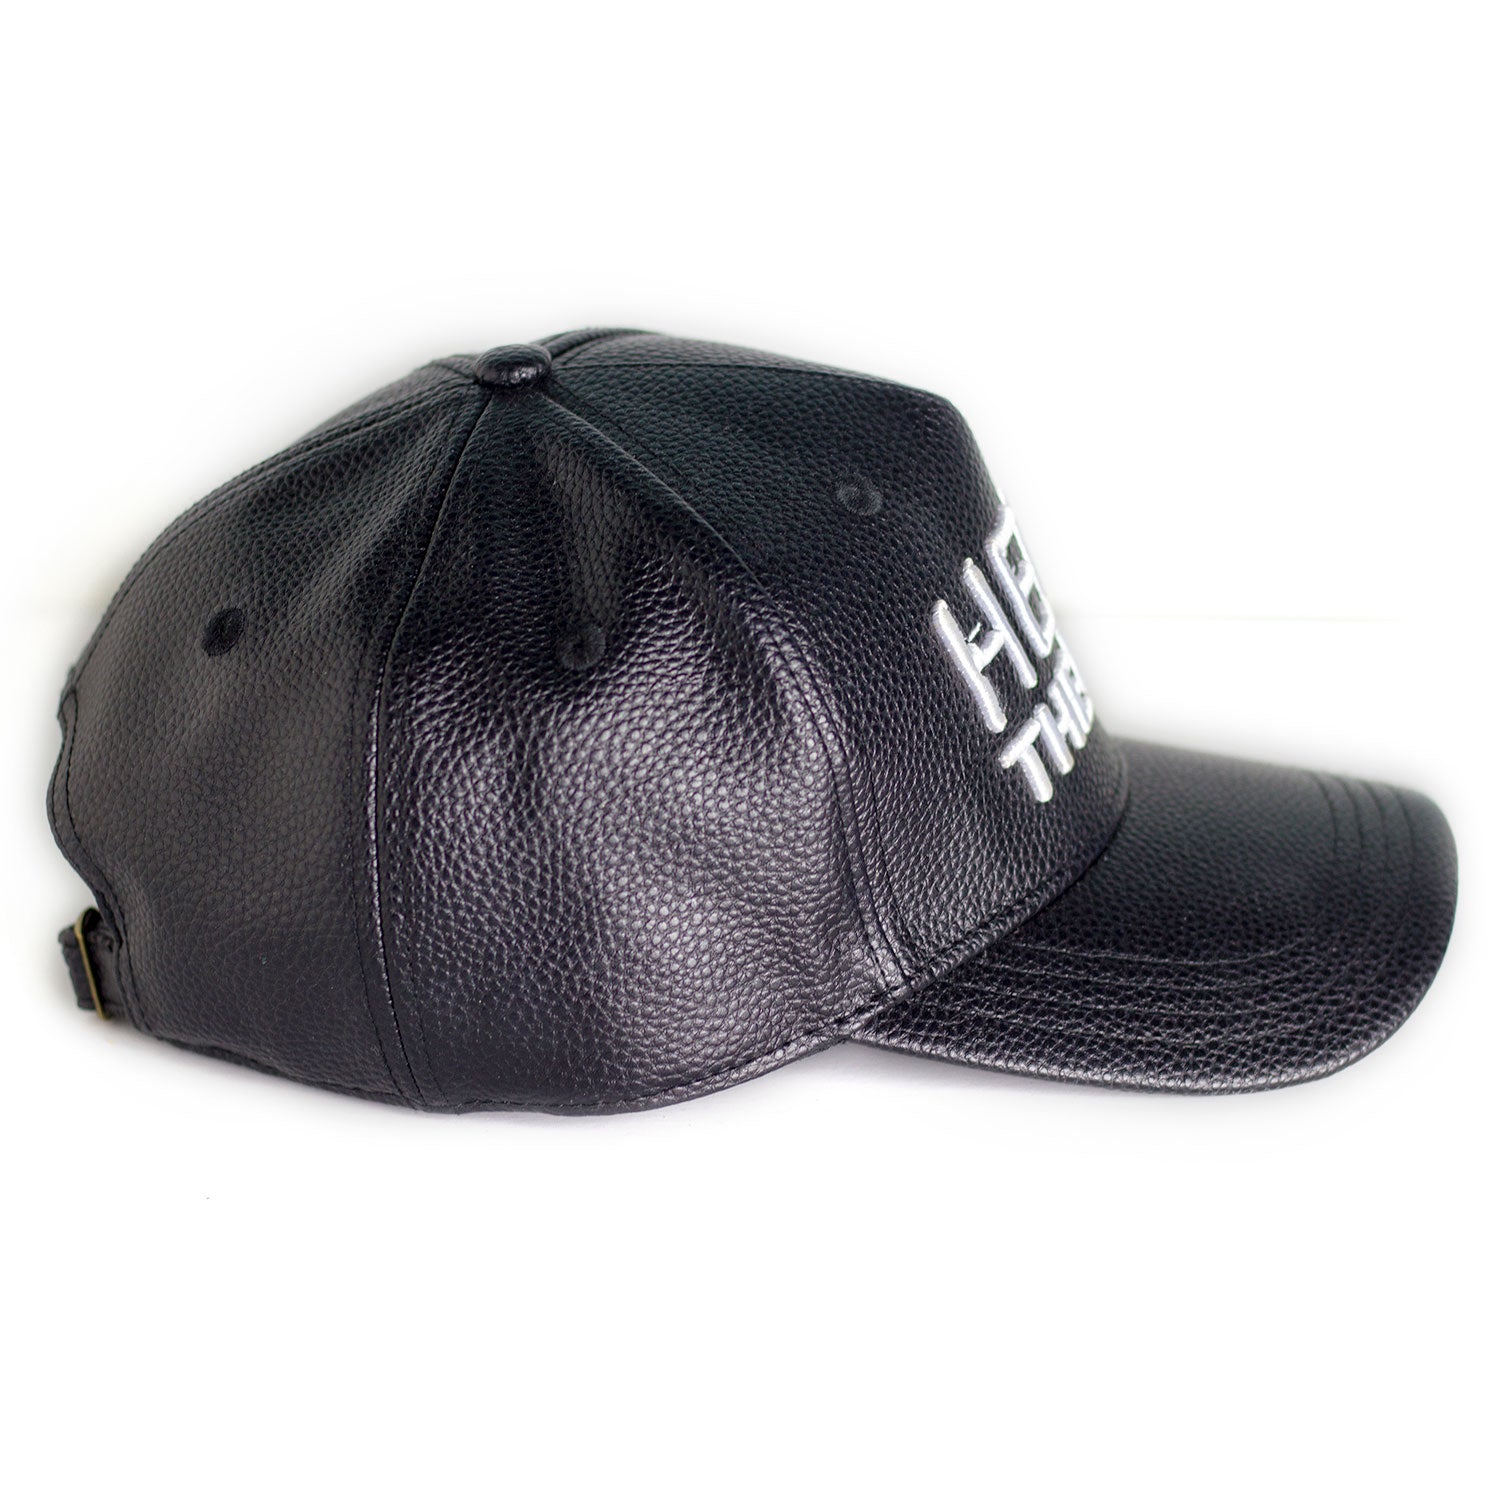 HEED THE HUM Faux Leather Unisex Hat, Hats, HEED THE HUM